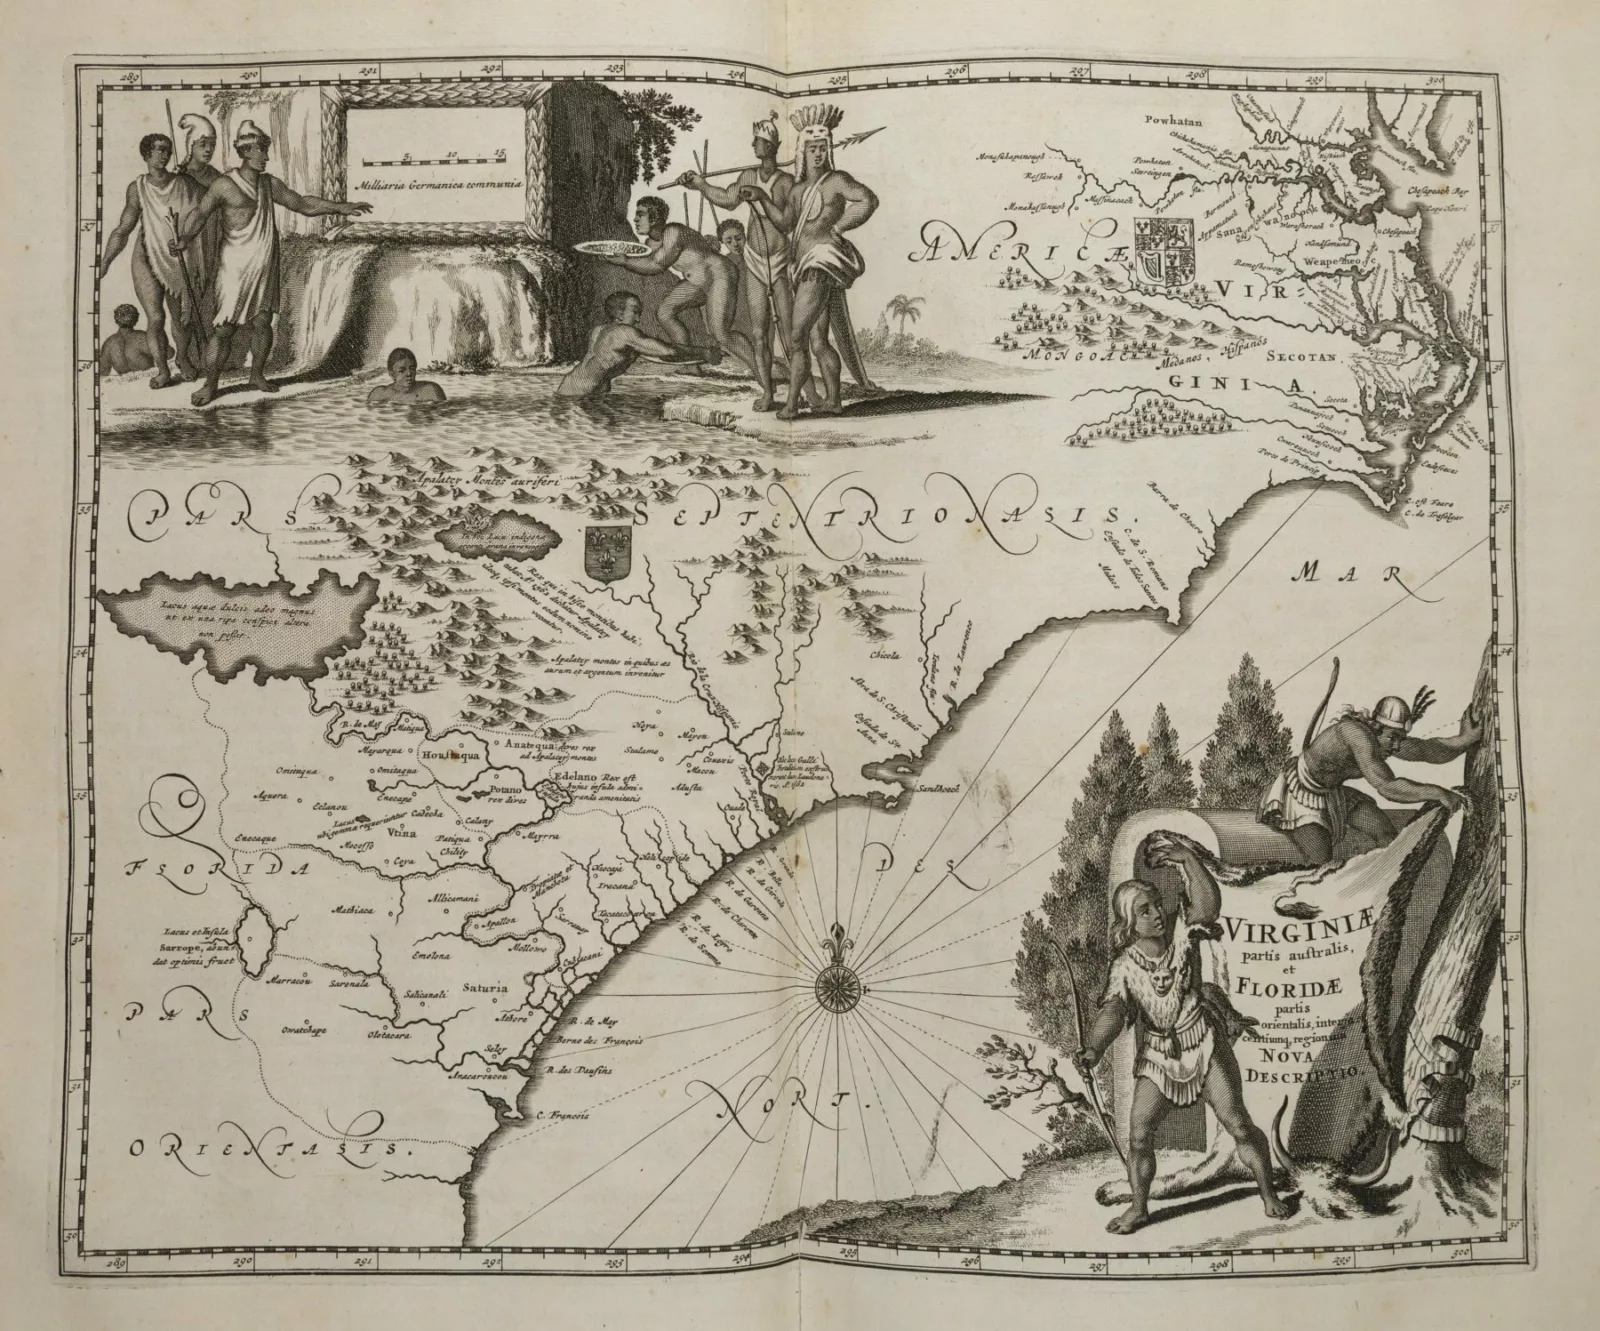 A 17th-century map of Virginia and Florida includes images representing Indigenous people.